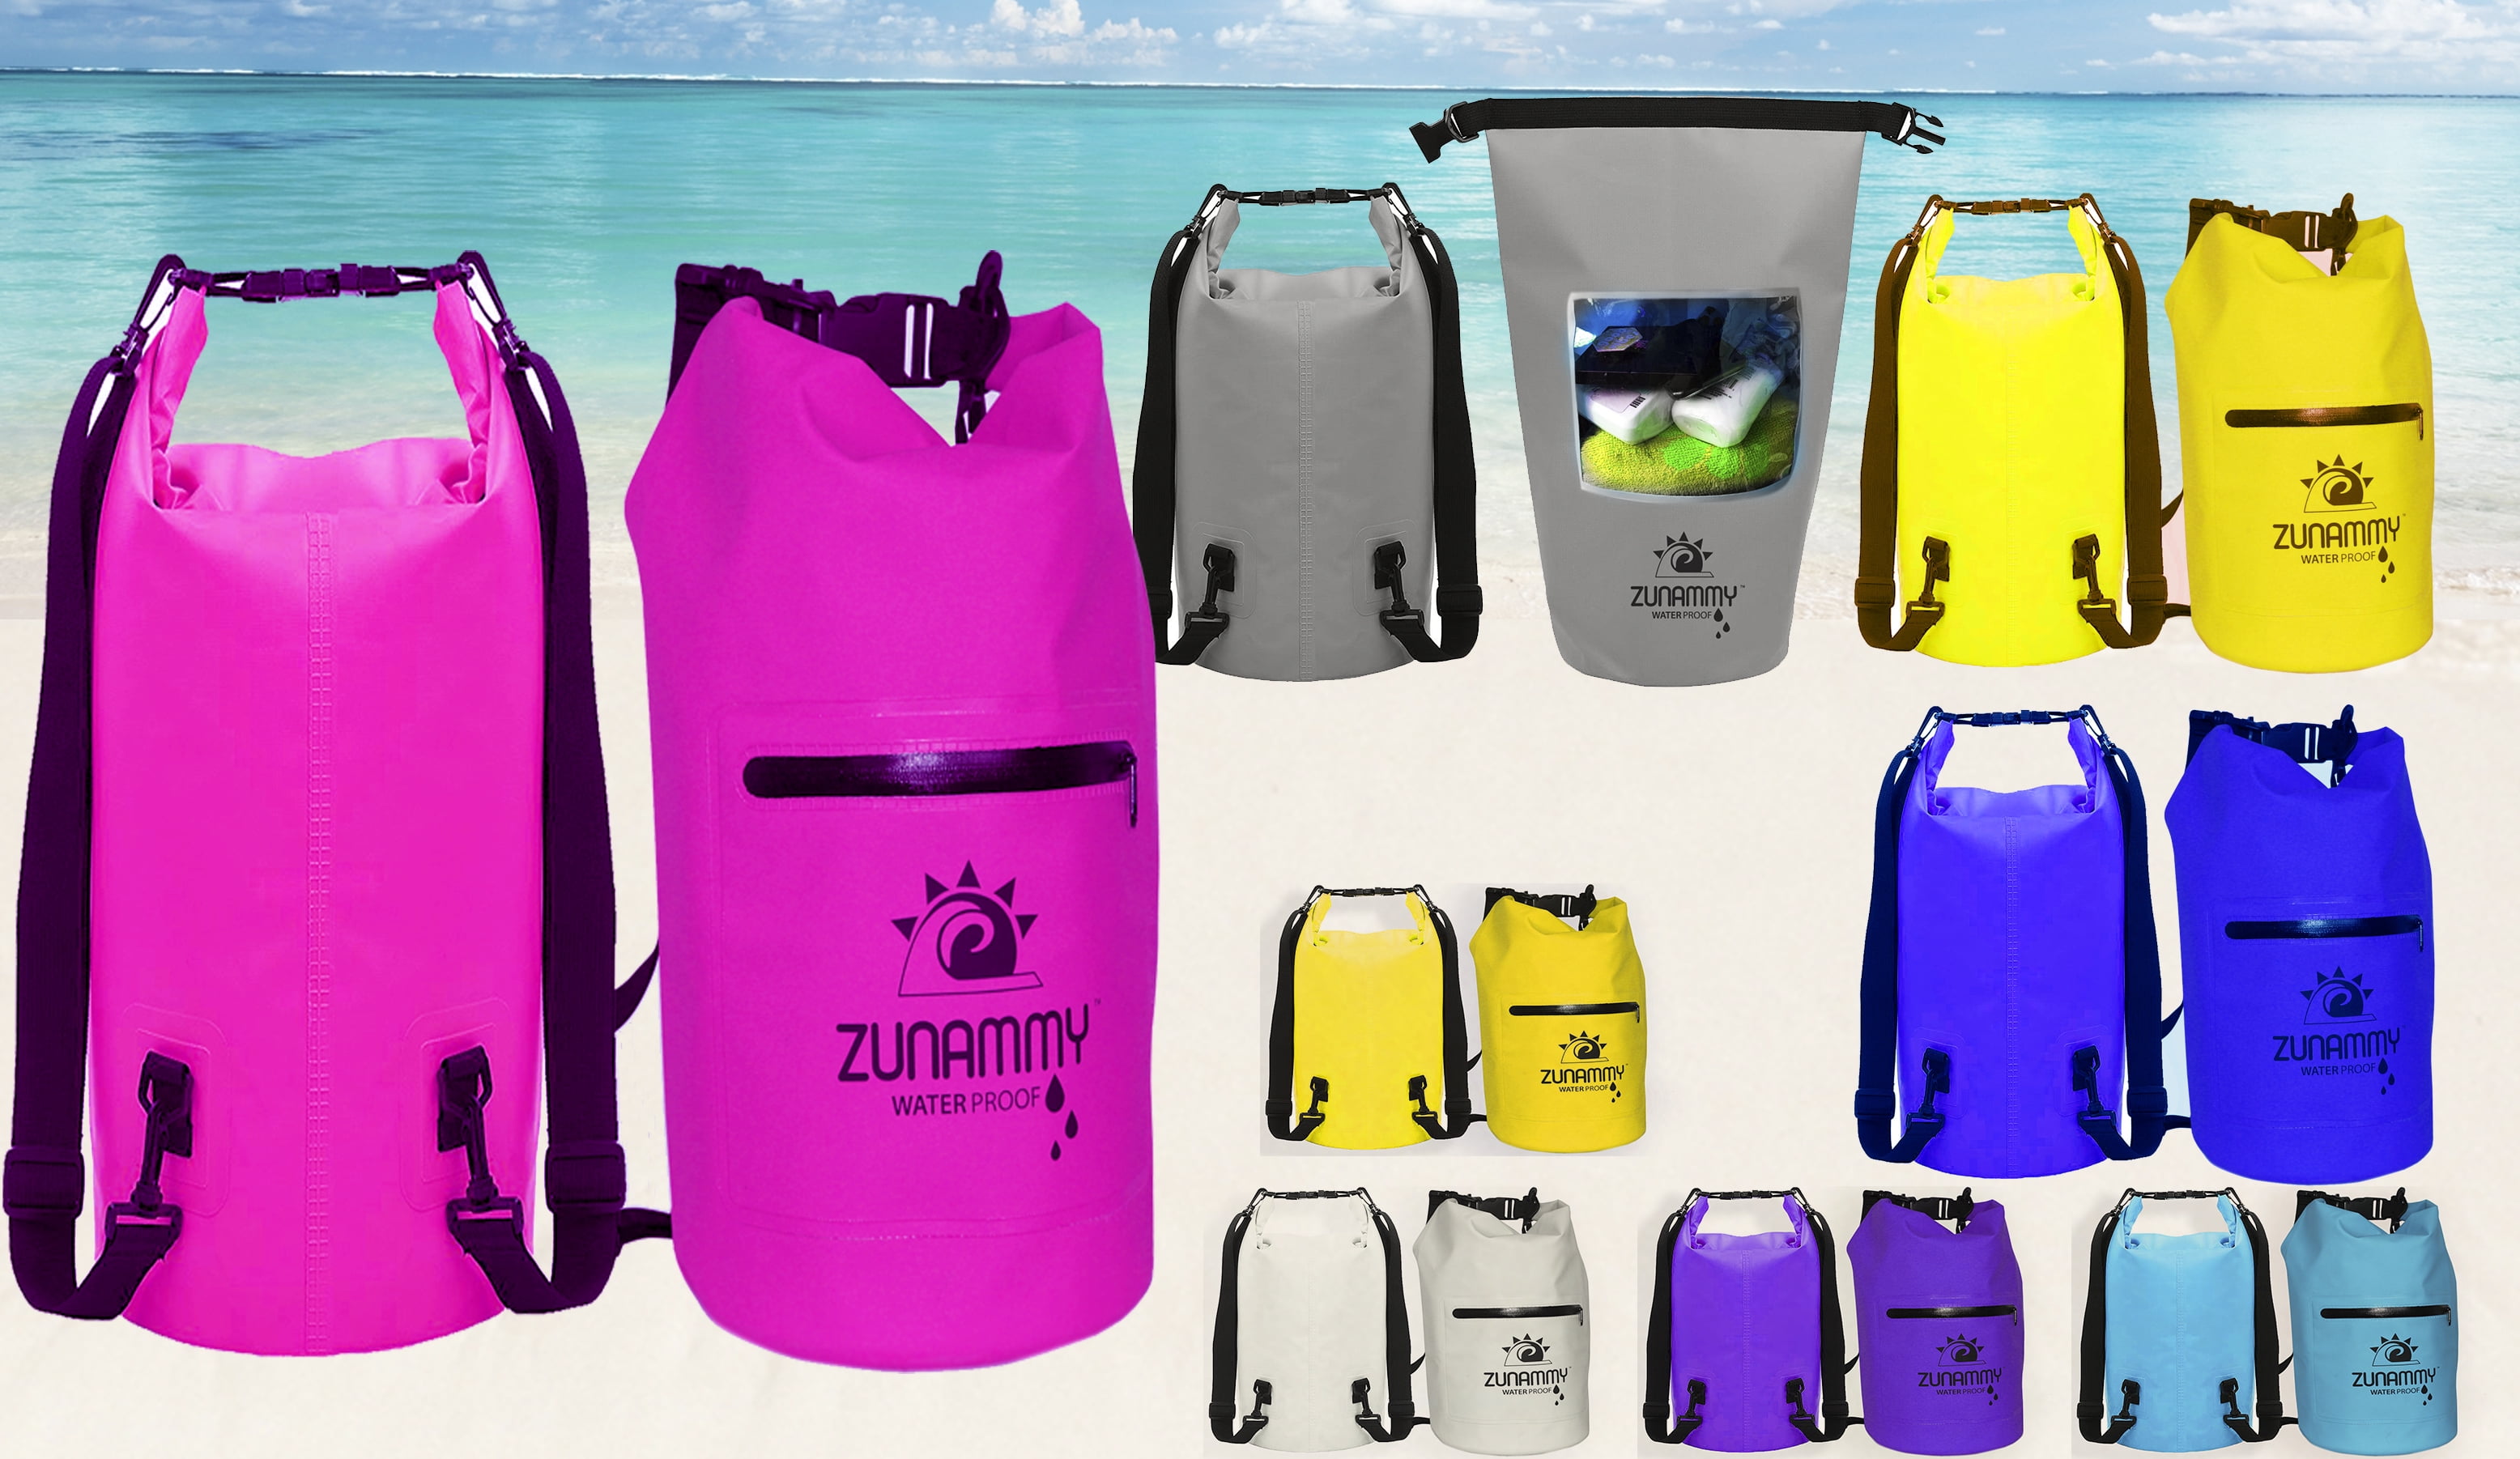 Waterproof Storage Dry Bag 20/ liters,Protect your phone,electronics food &more 